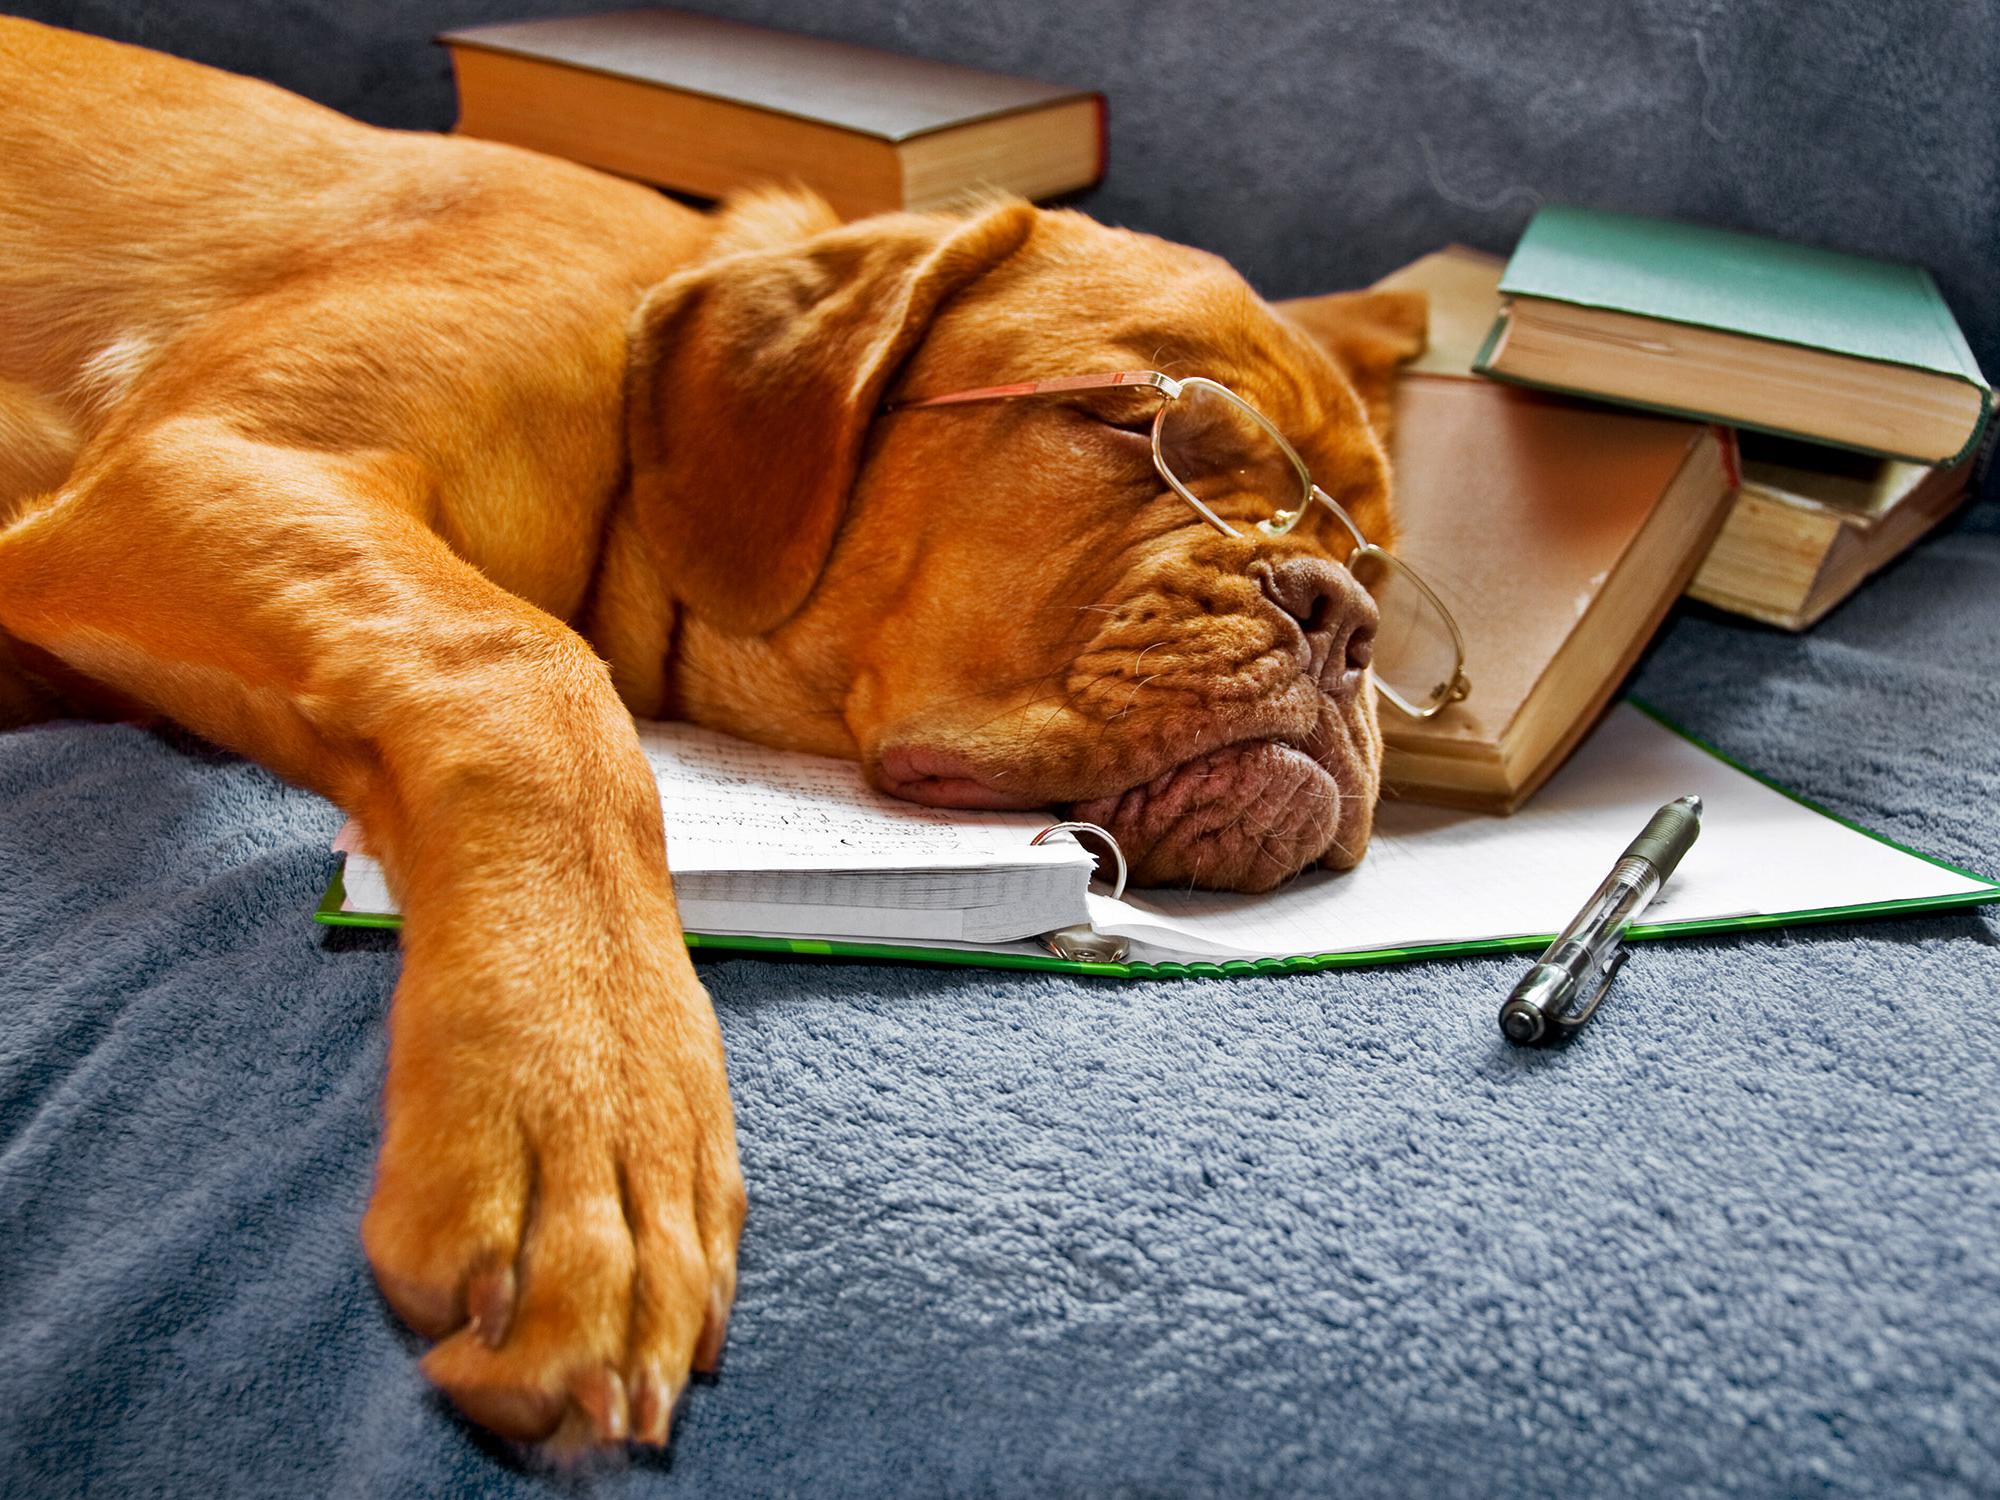 Dog with glasses sleeping on a notebook.